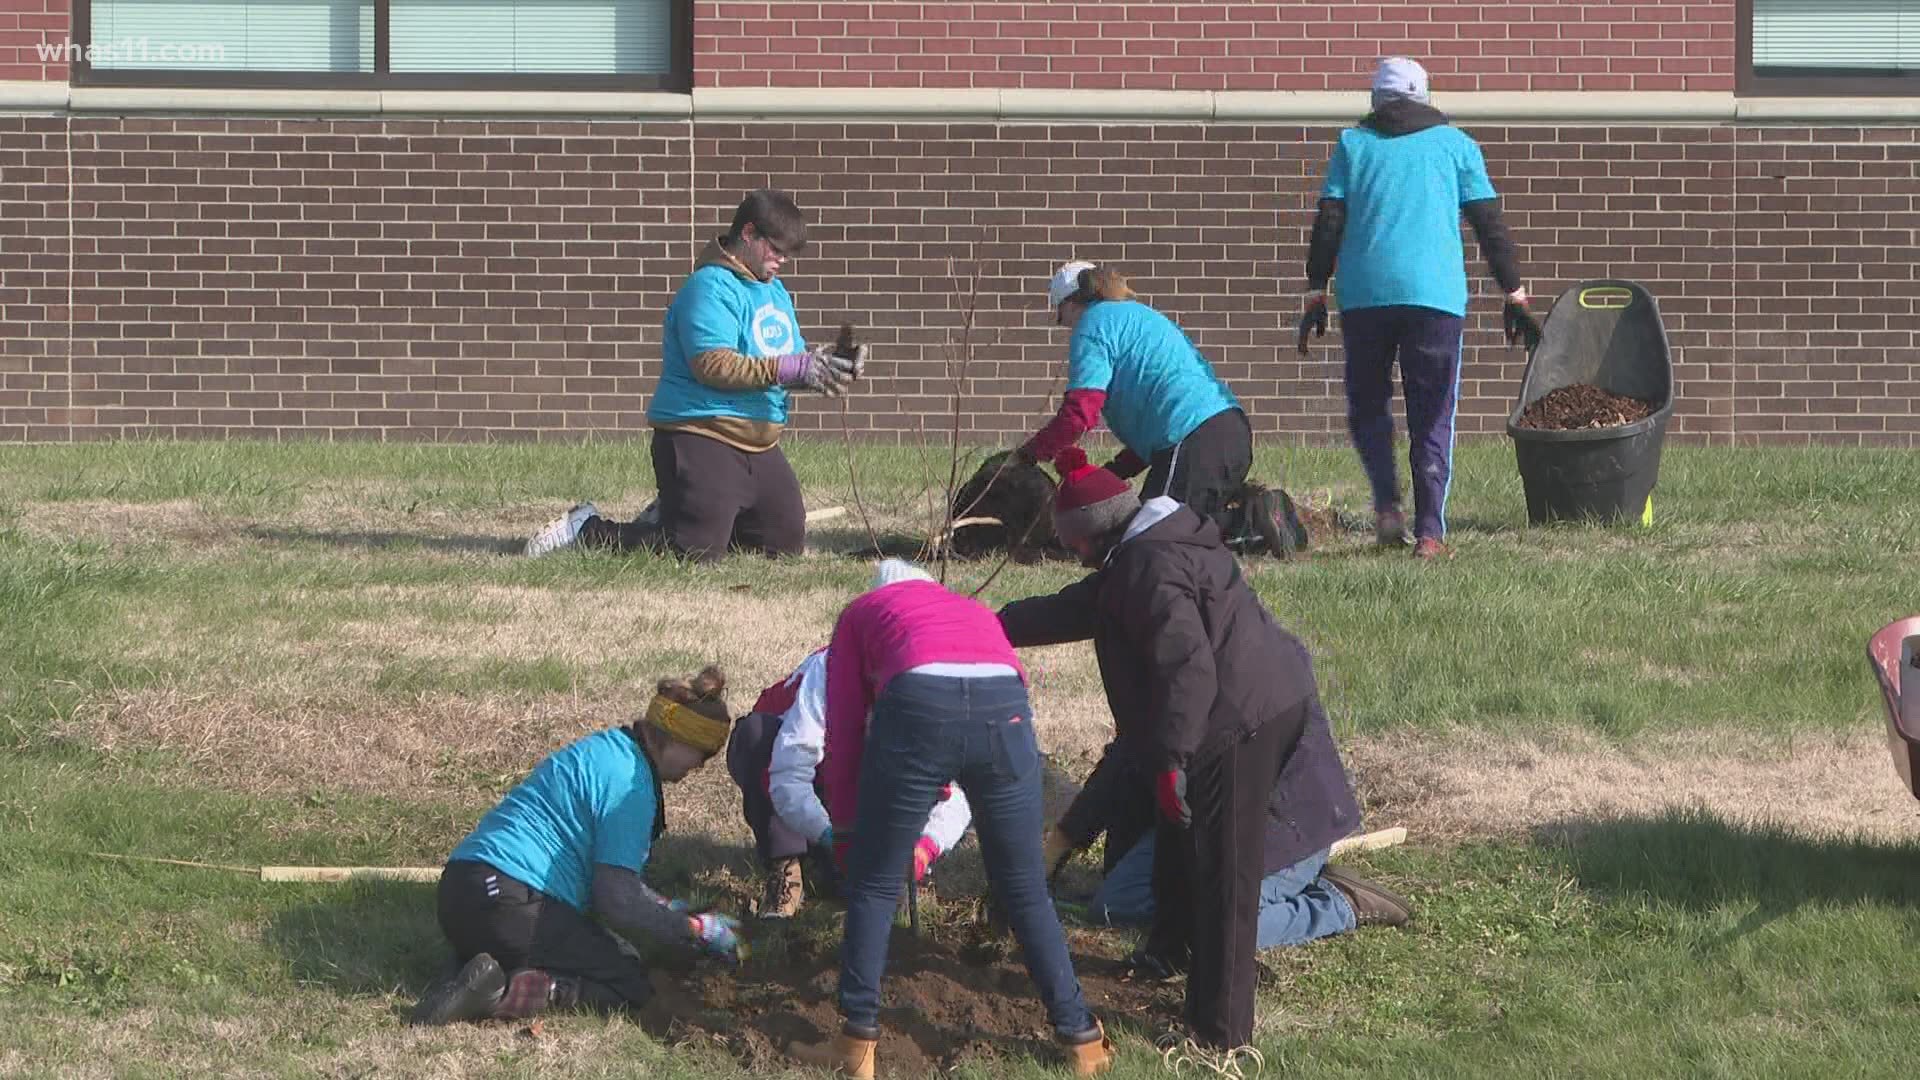 A Louisville organization gives out free trees to help restore the city's tree canopy.